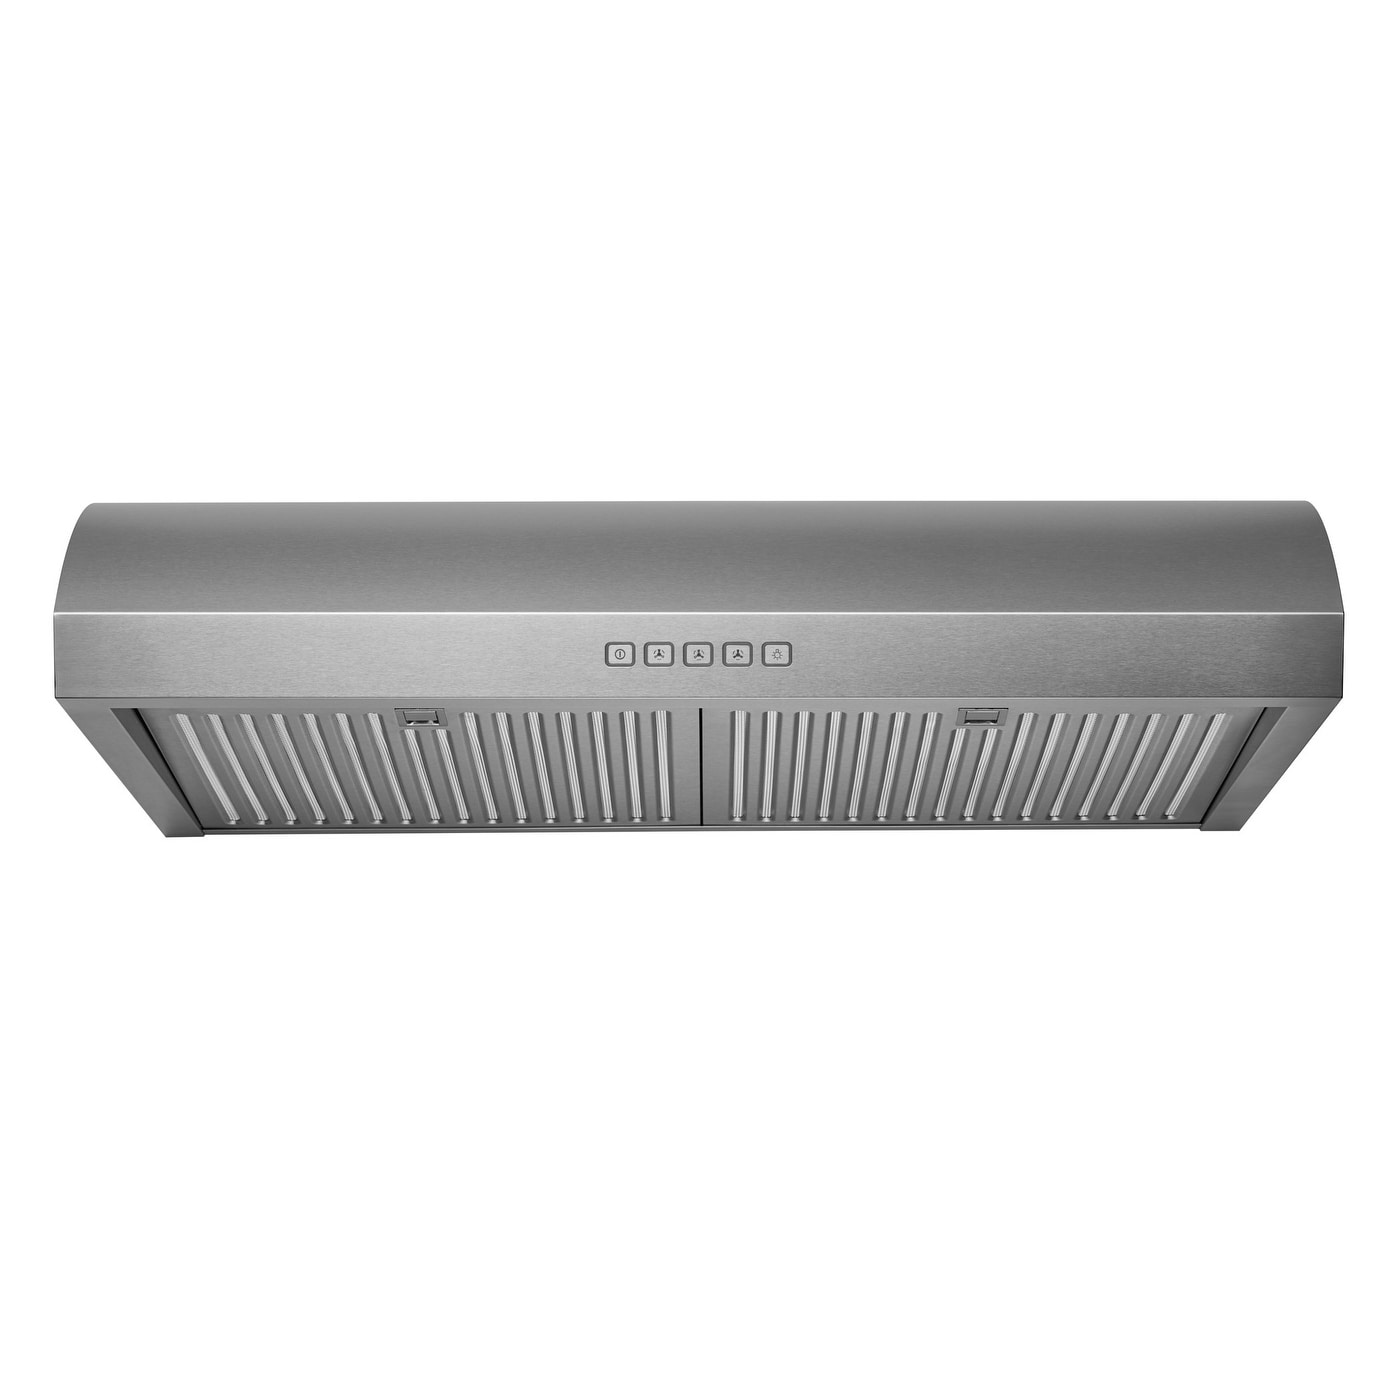 Hauslane Chef Series 30-inch B018 Convertible Under Cabinet Range Hood,  3-Way Venting, 250 CFM, Perfect for Ductless Kitchen